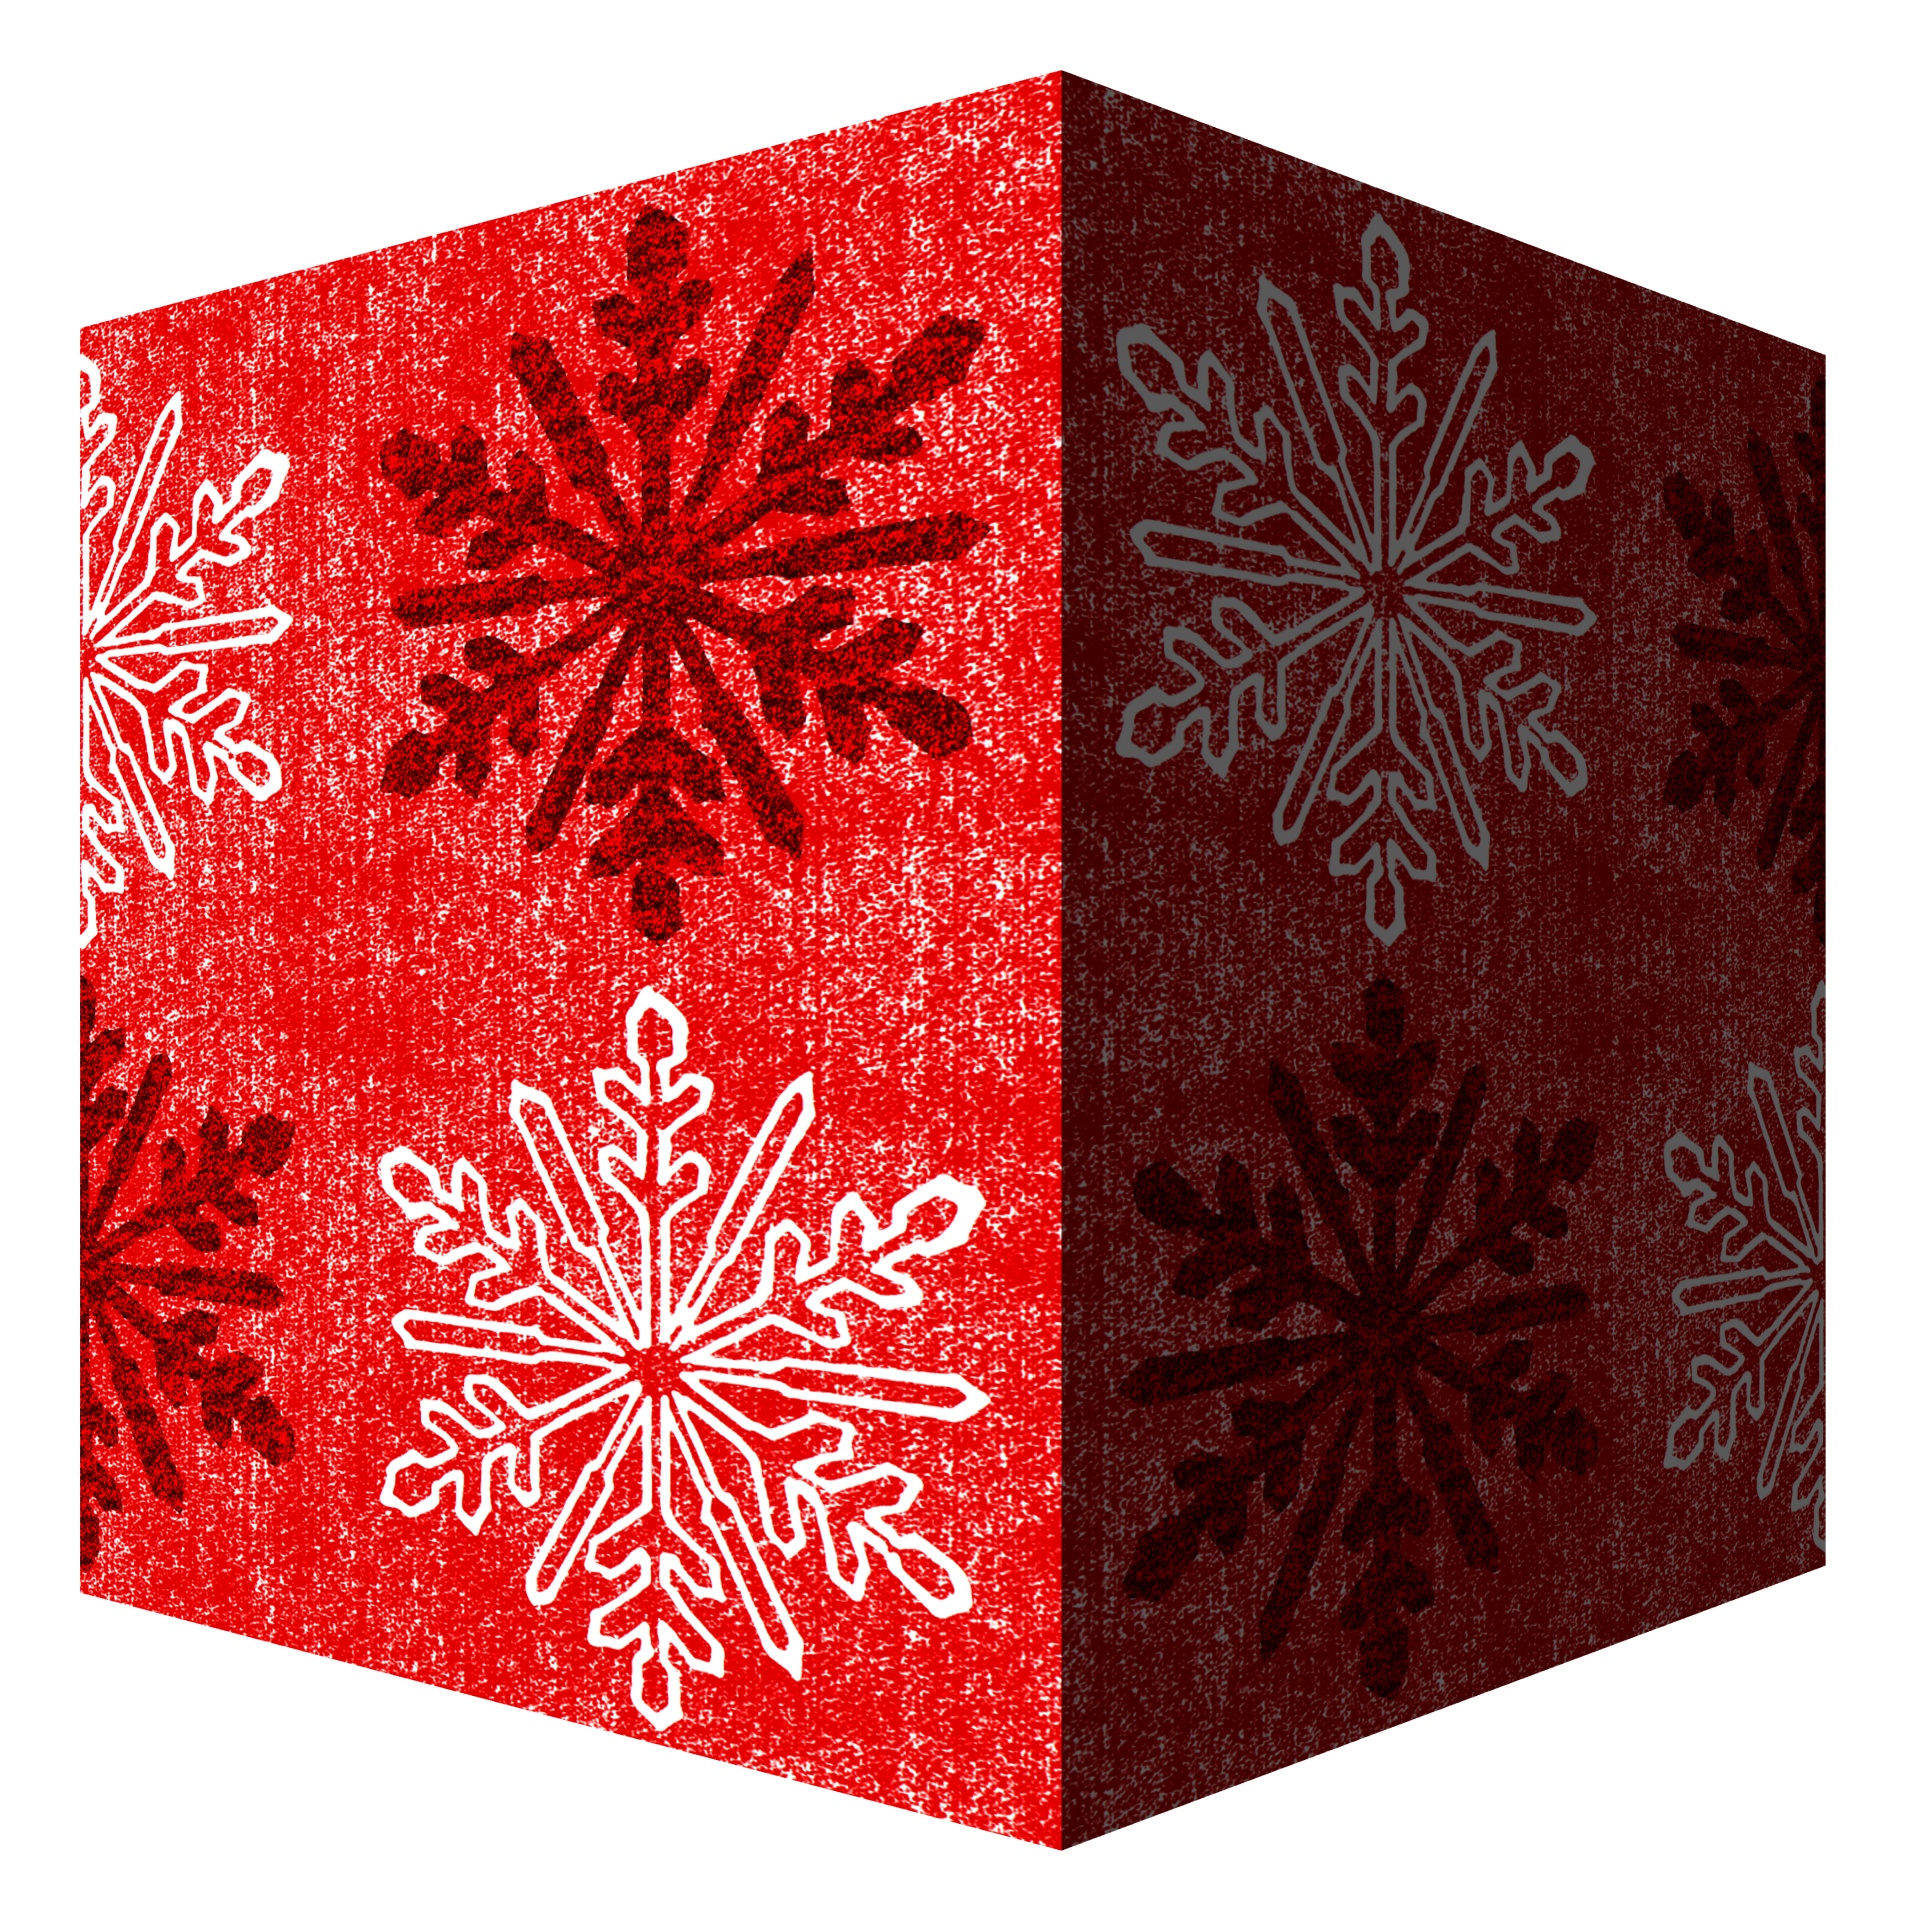 Red Christmas Box With Snowflakes